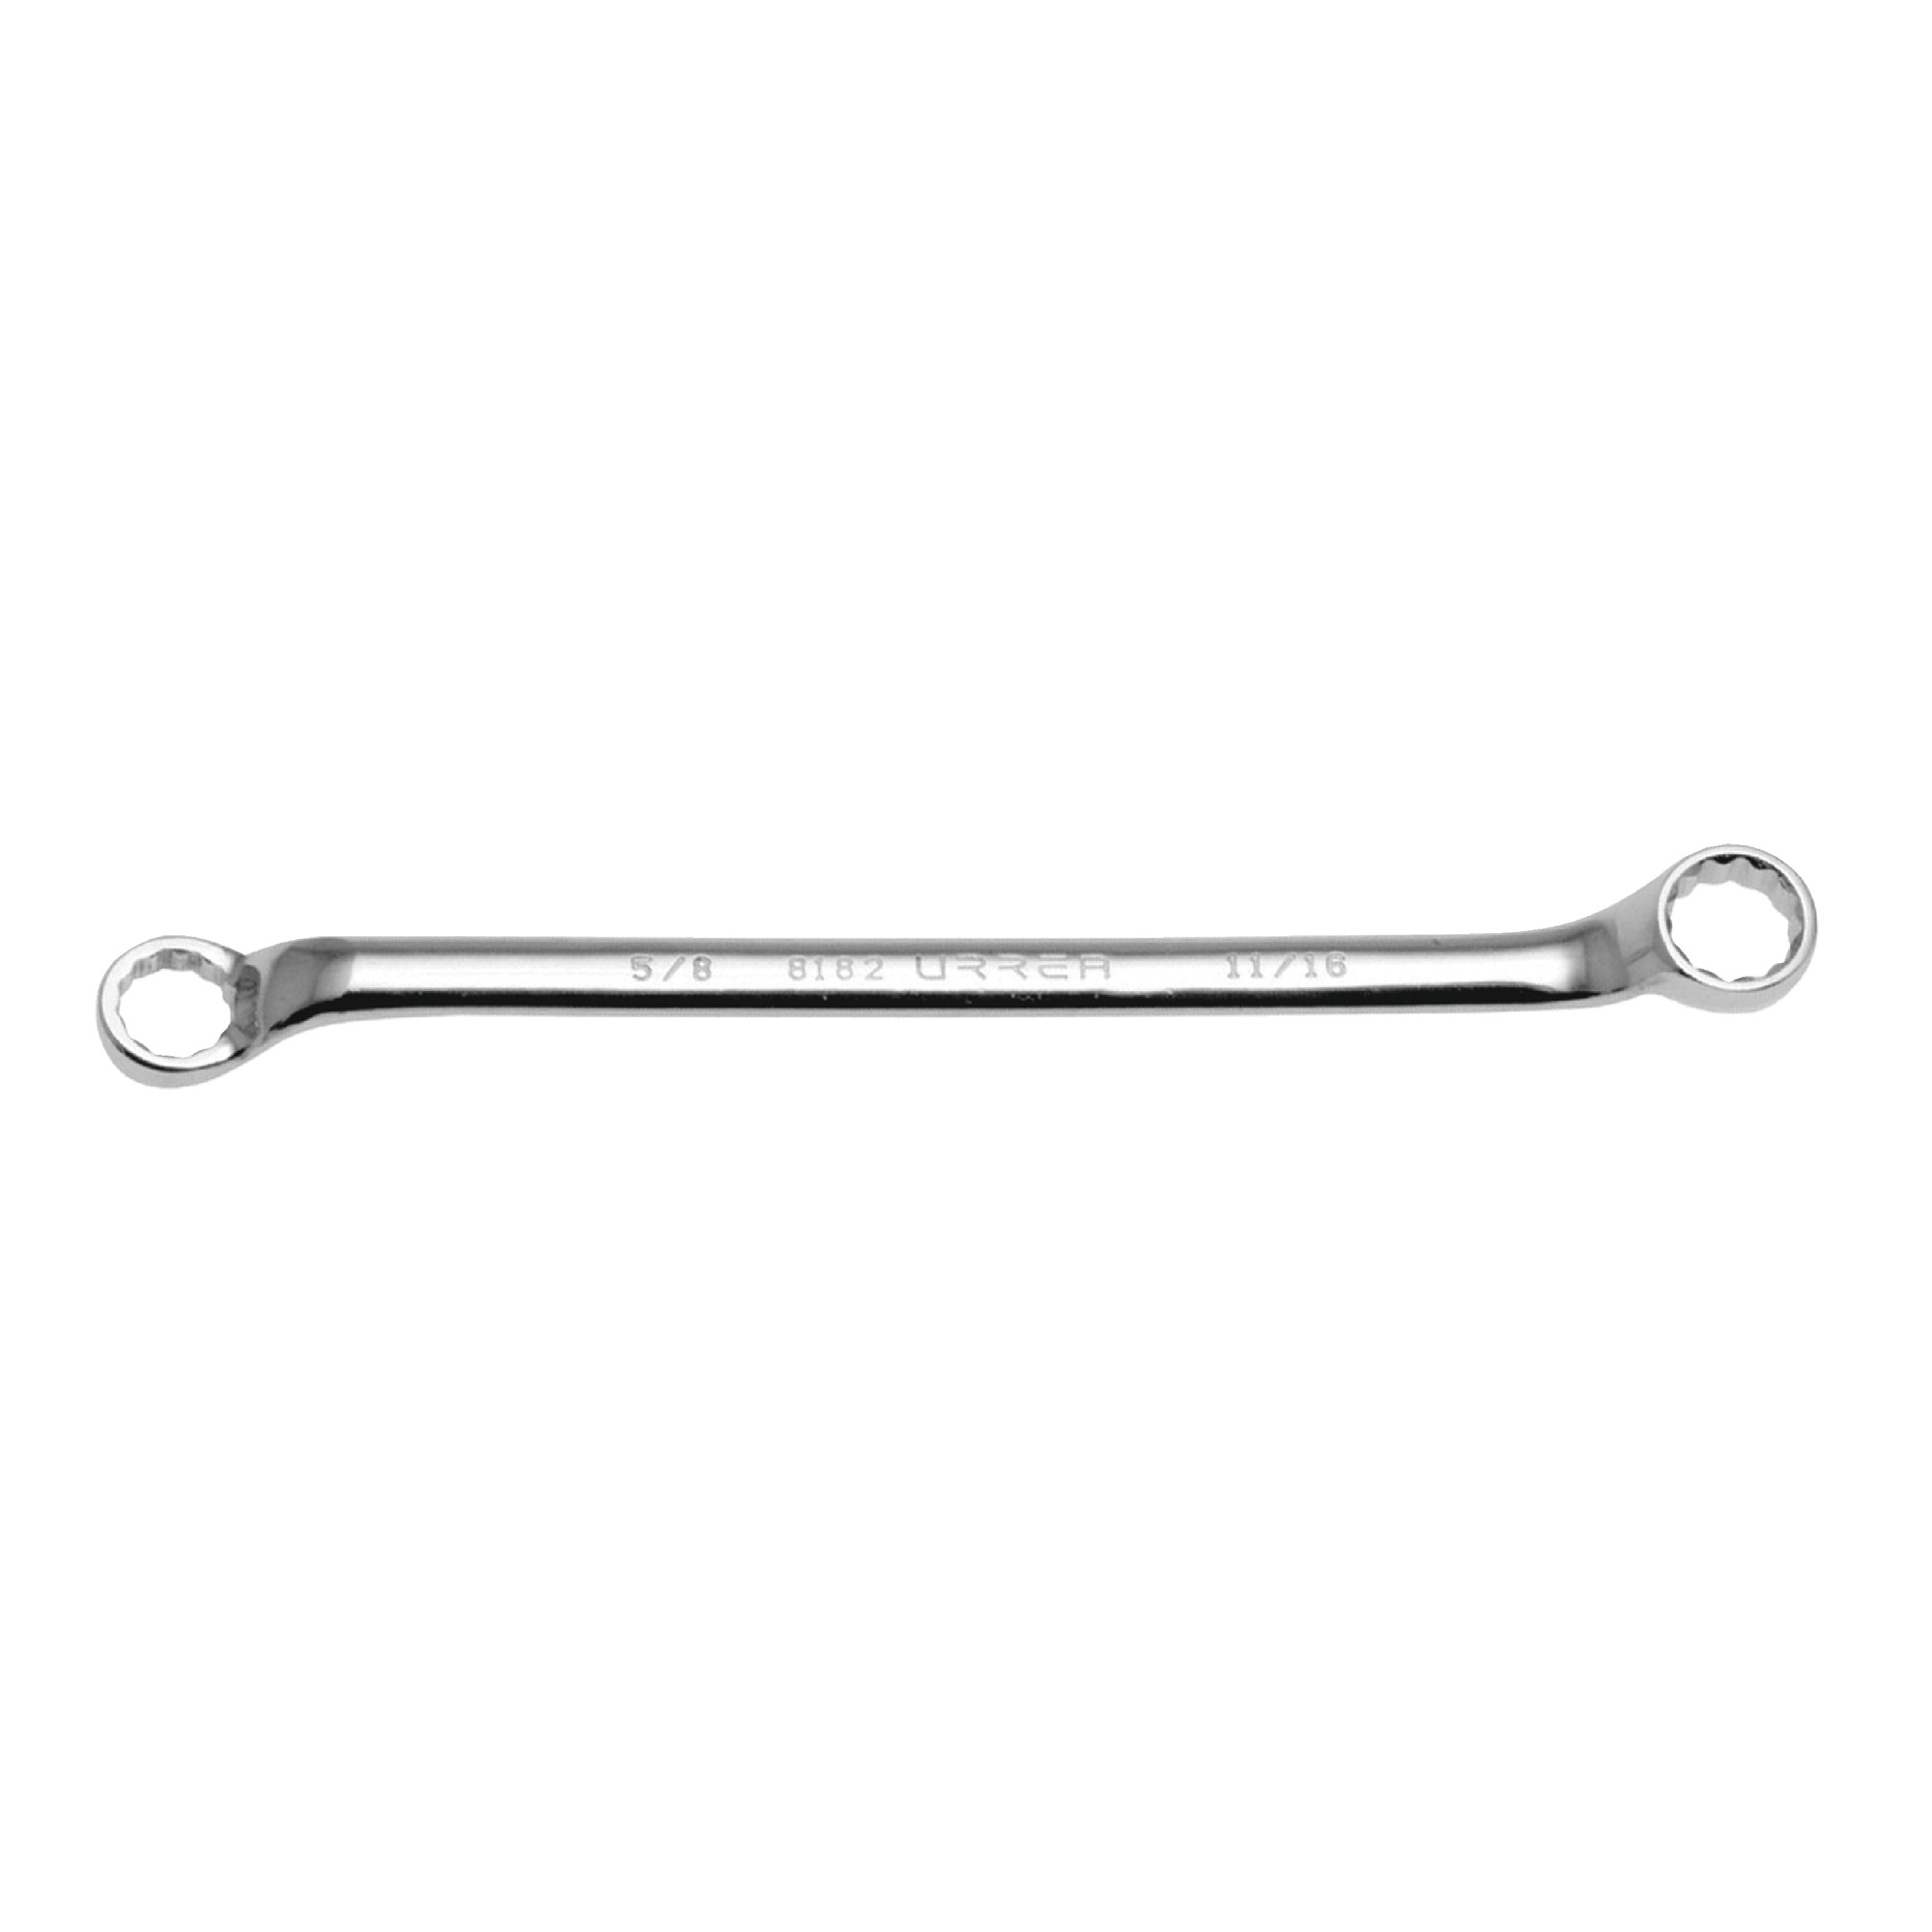 81314 13mm x 14mm Chrome Finish 12 Point Box Wrench